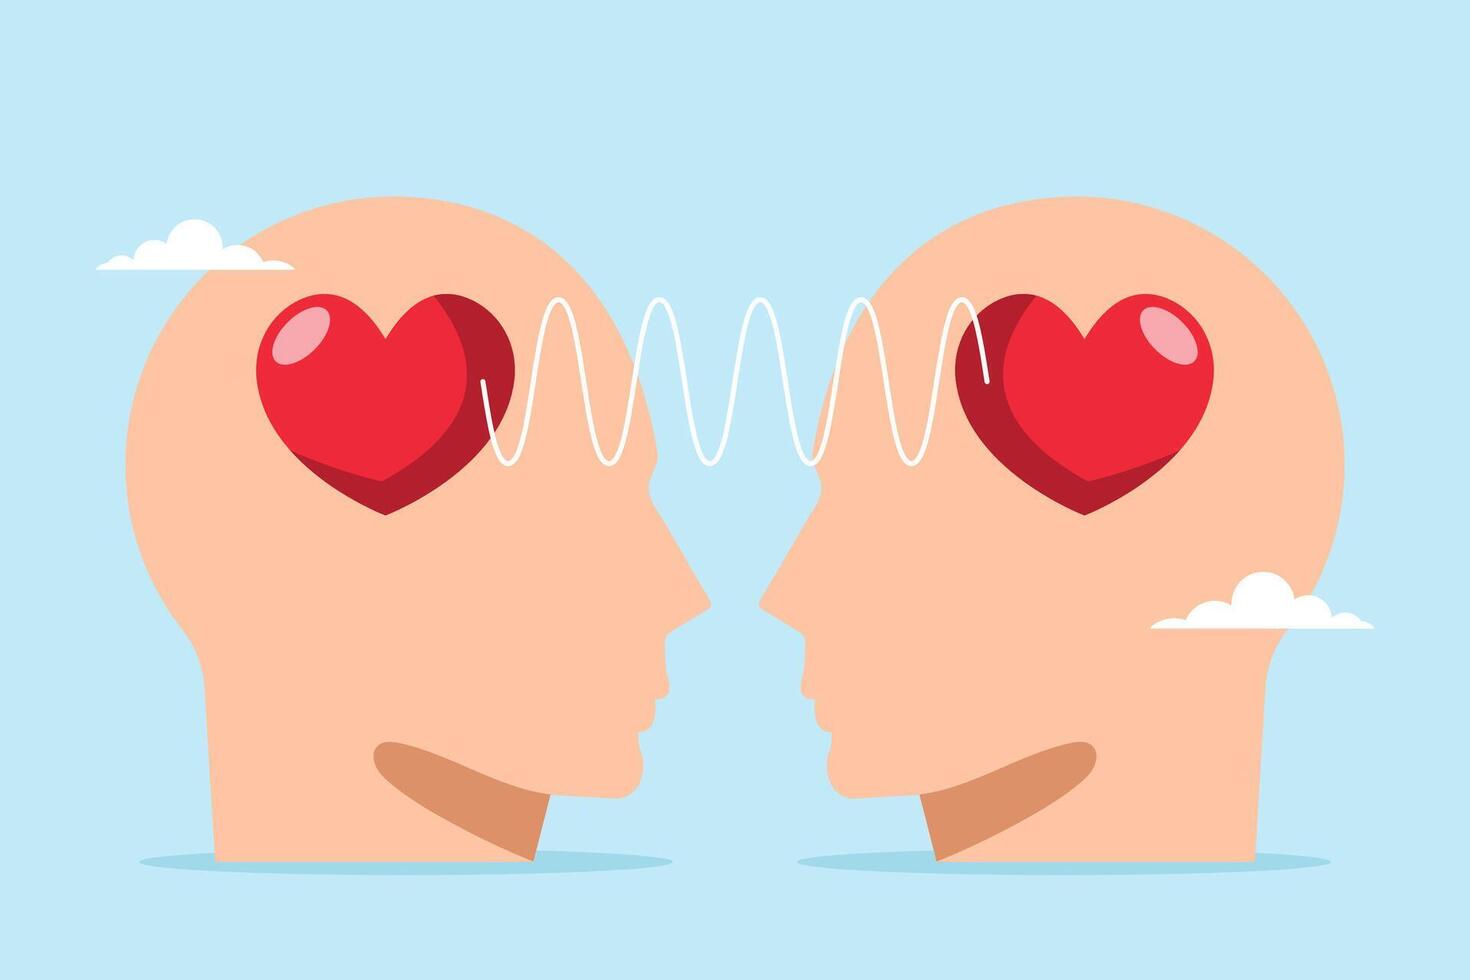 Heads of people with hearts sharing feelings illustrating empathy, sympathy, caring, willingness to support others emotionally. Concept of understanding, kindness, and social support vector